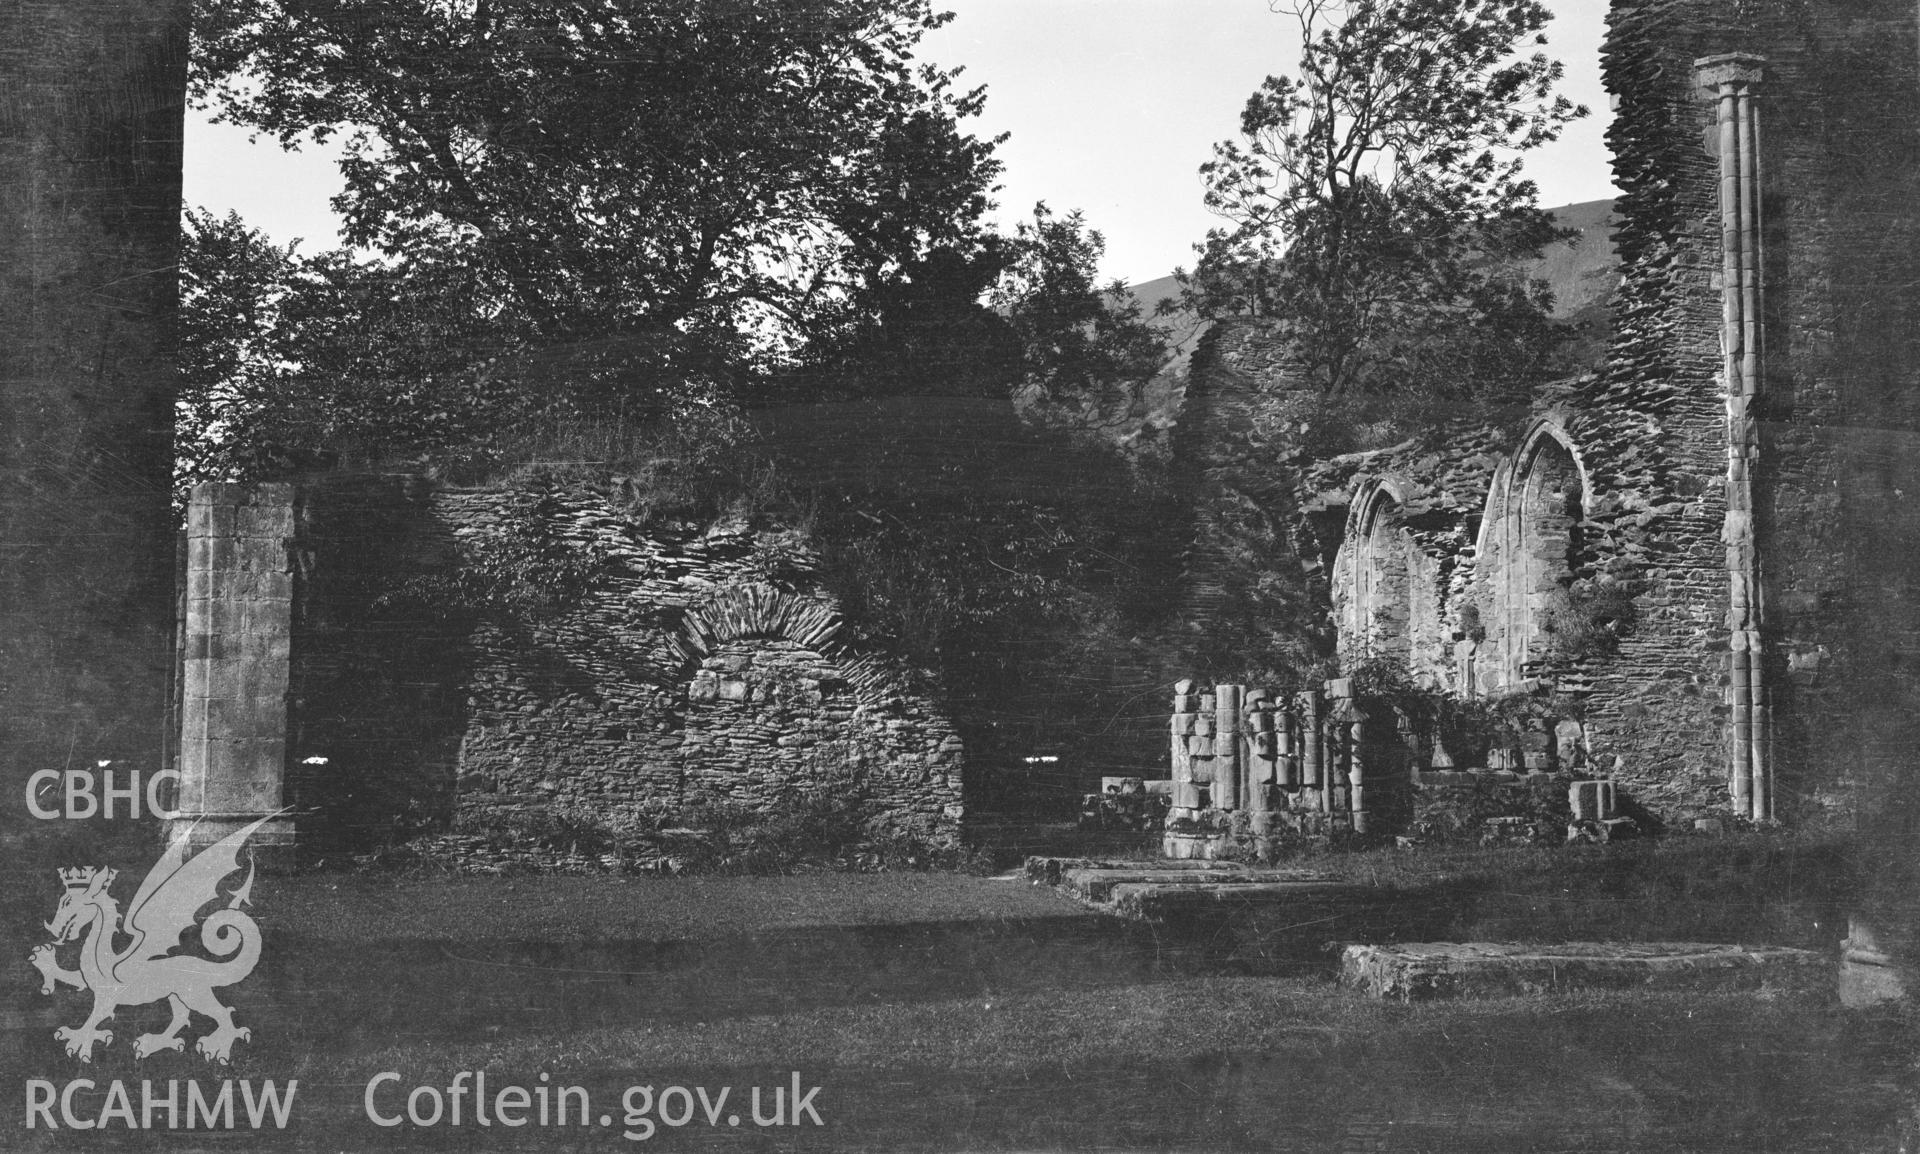 Digital copy of a nitrate negative showing view of Valle Crucis Abbey